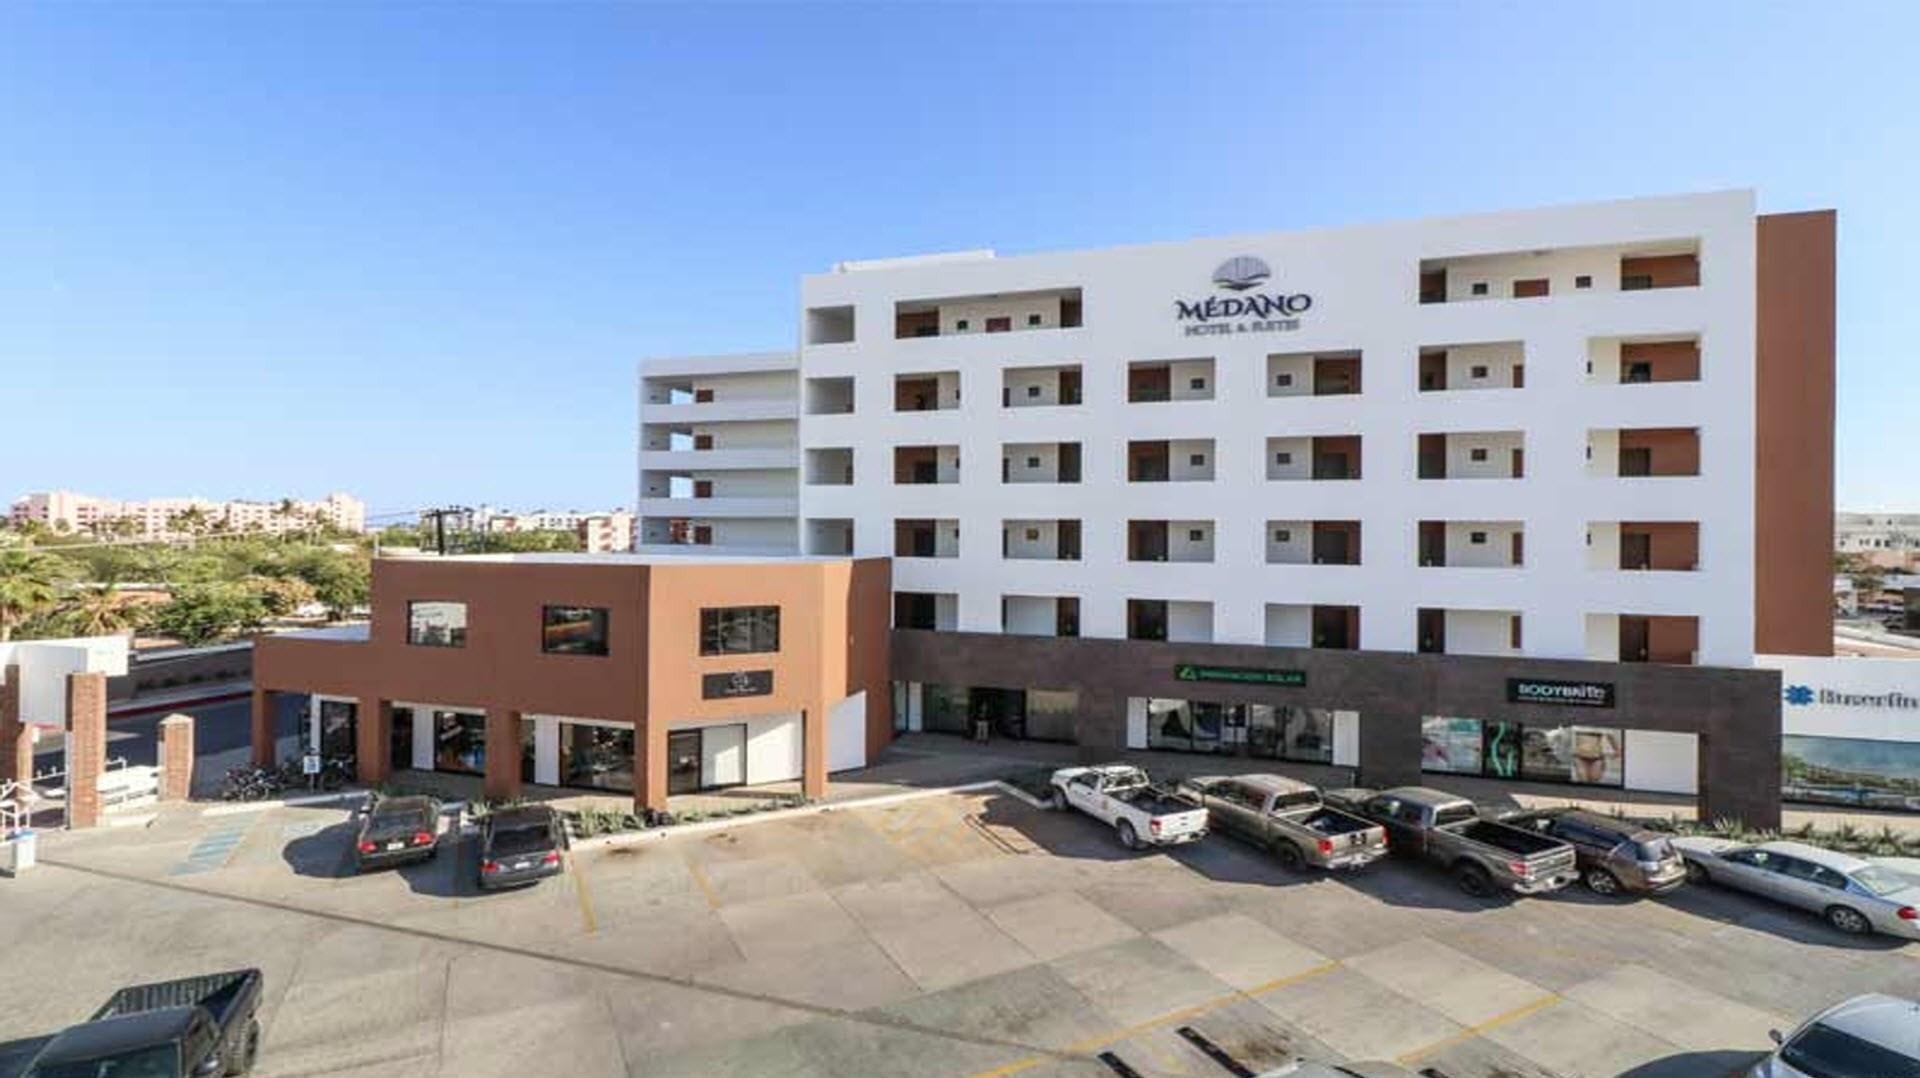 Medano Hotel and Suites in Cabo San Lucas, MX